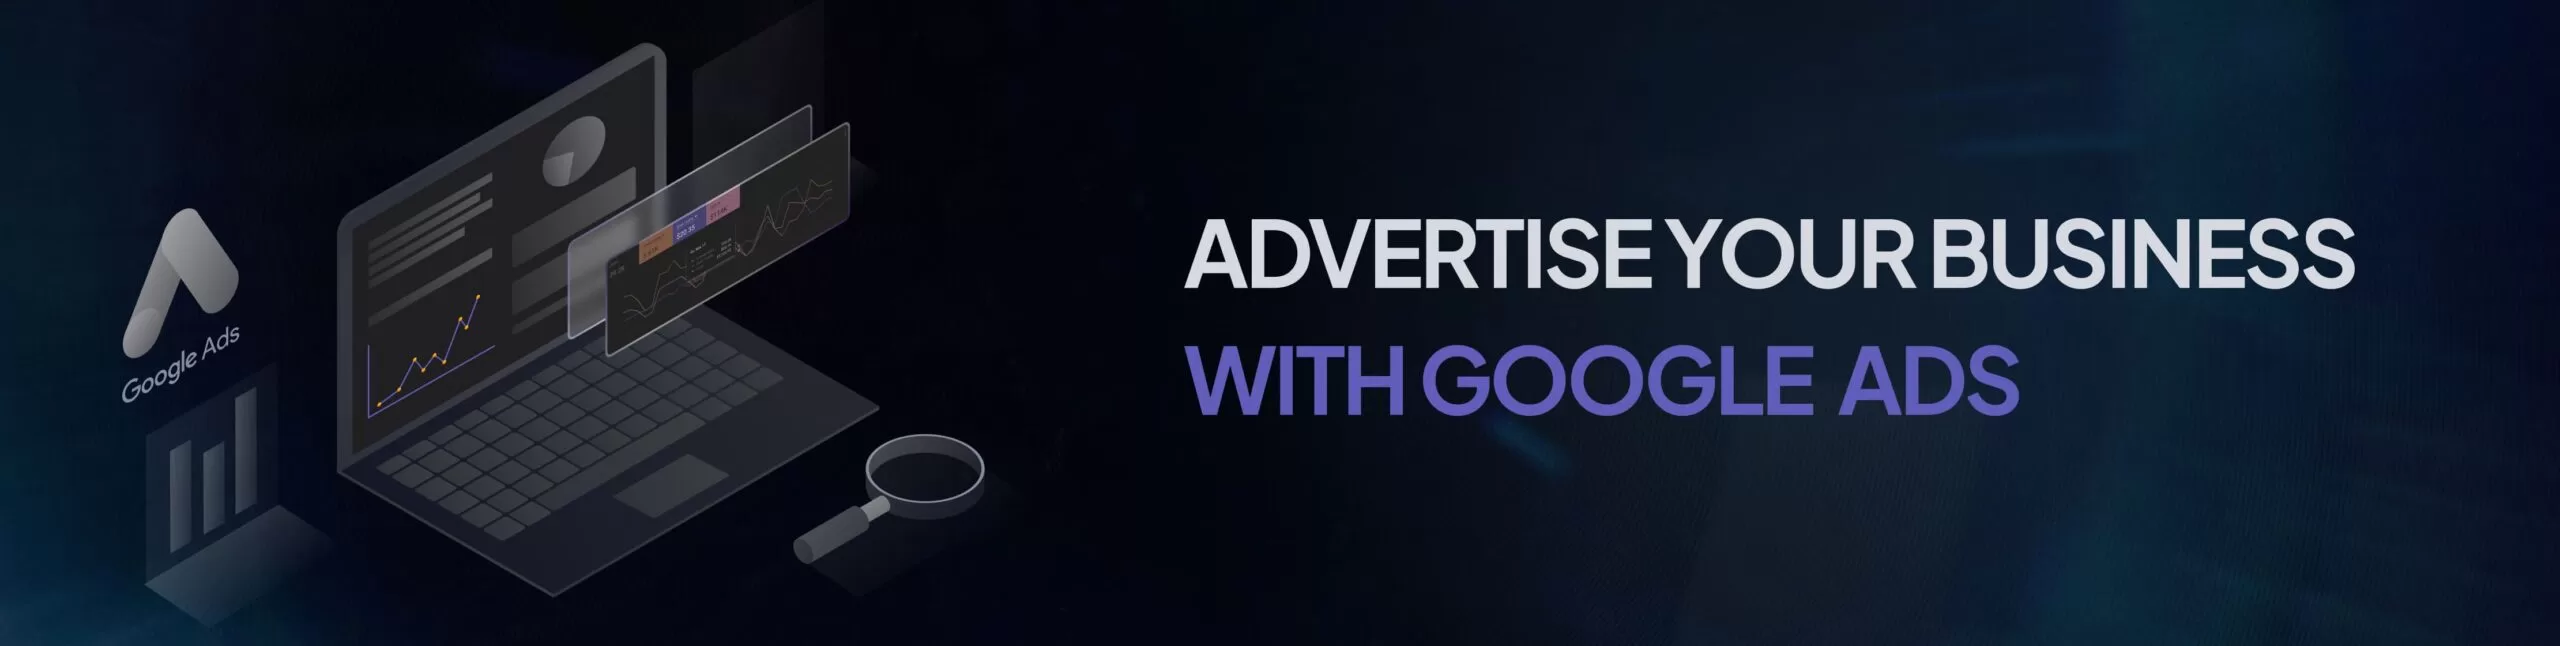 reliable google advertising company